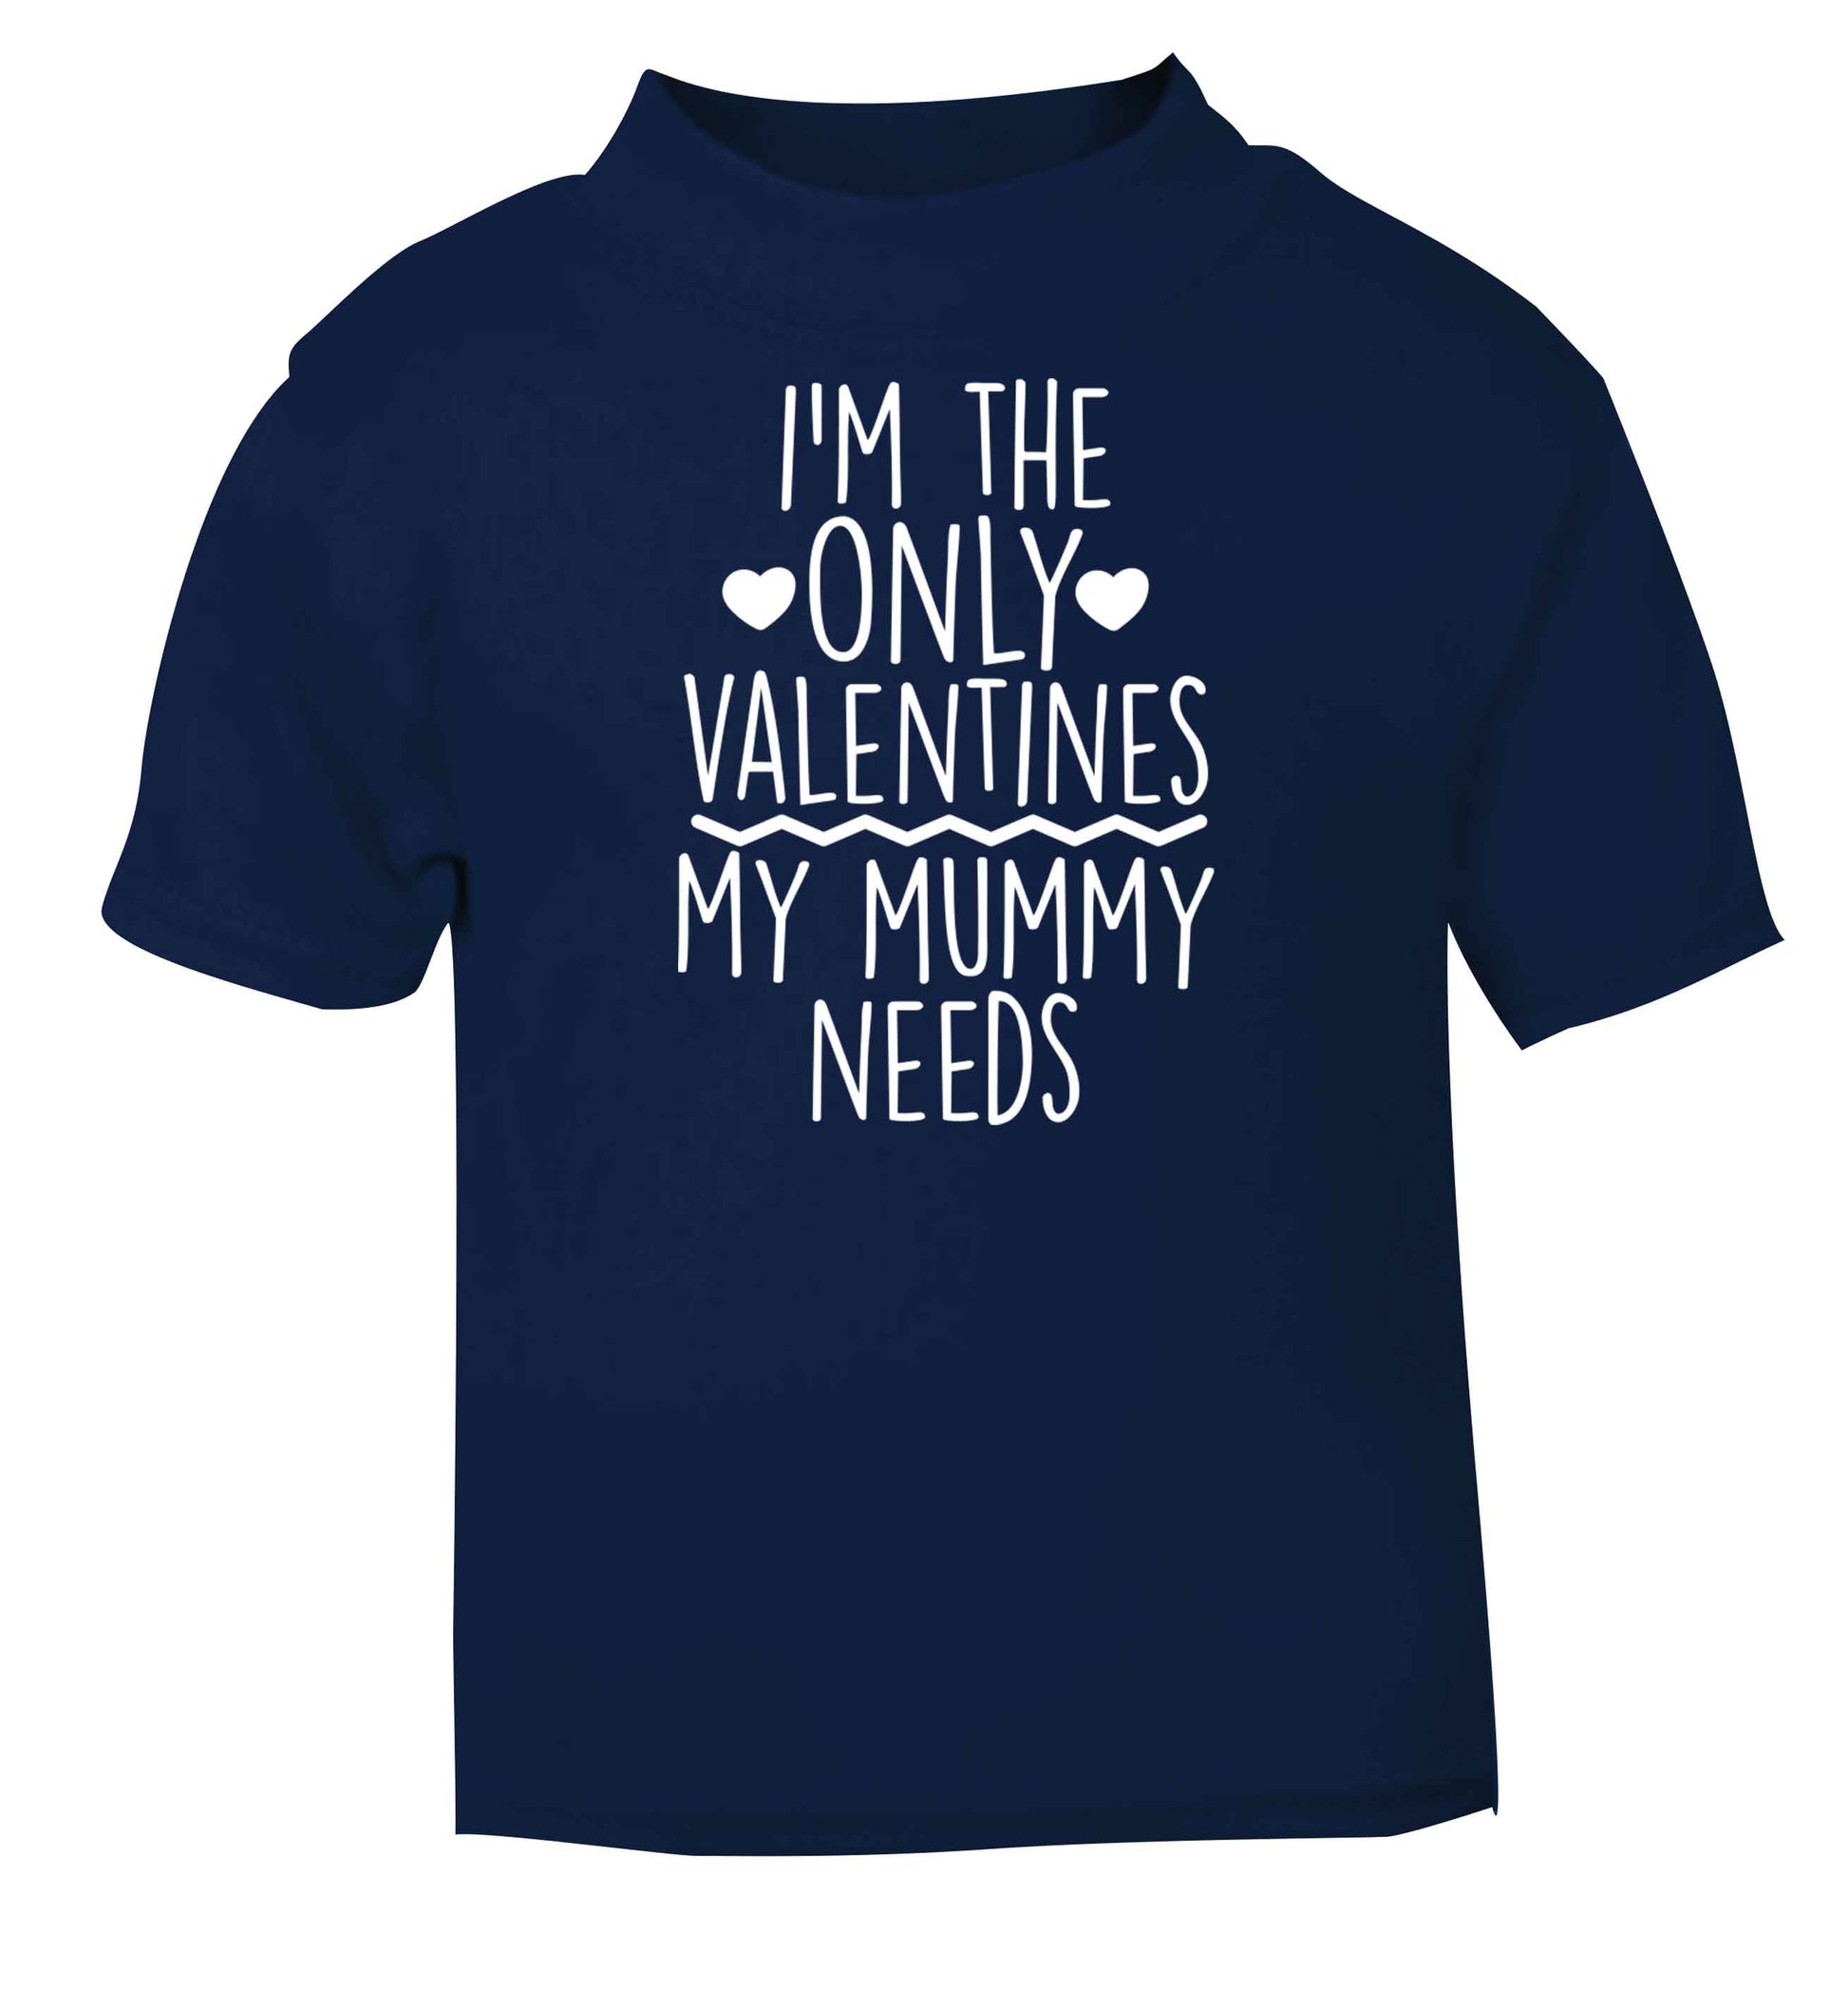 I'm the only valentines my mummy needs navy baby toddler Tshirt 2 Years